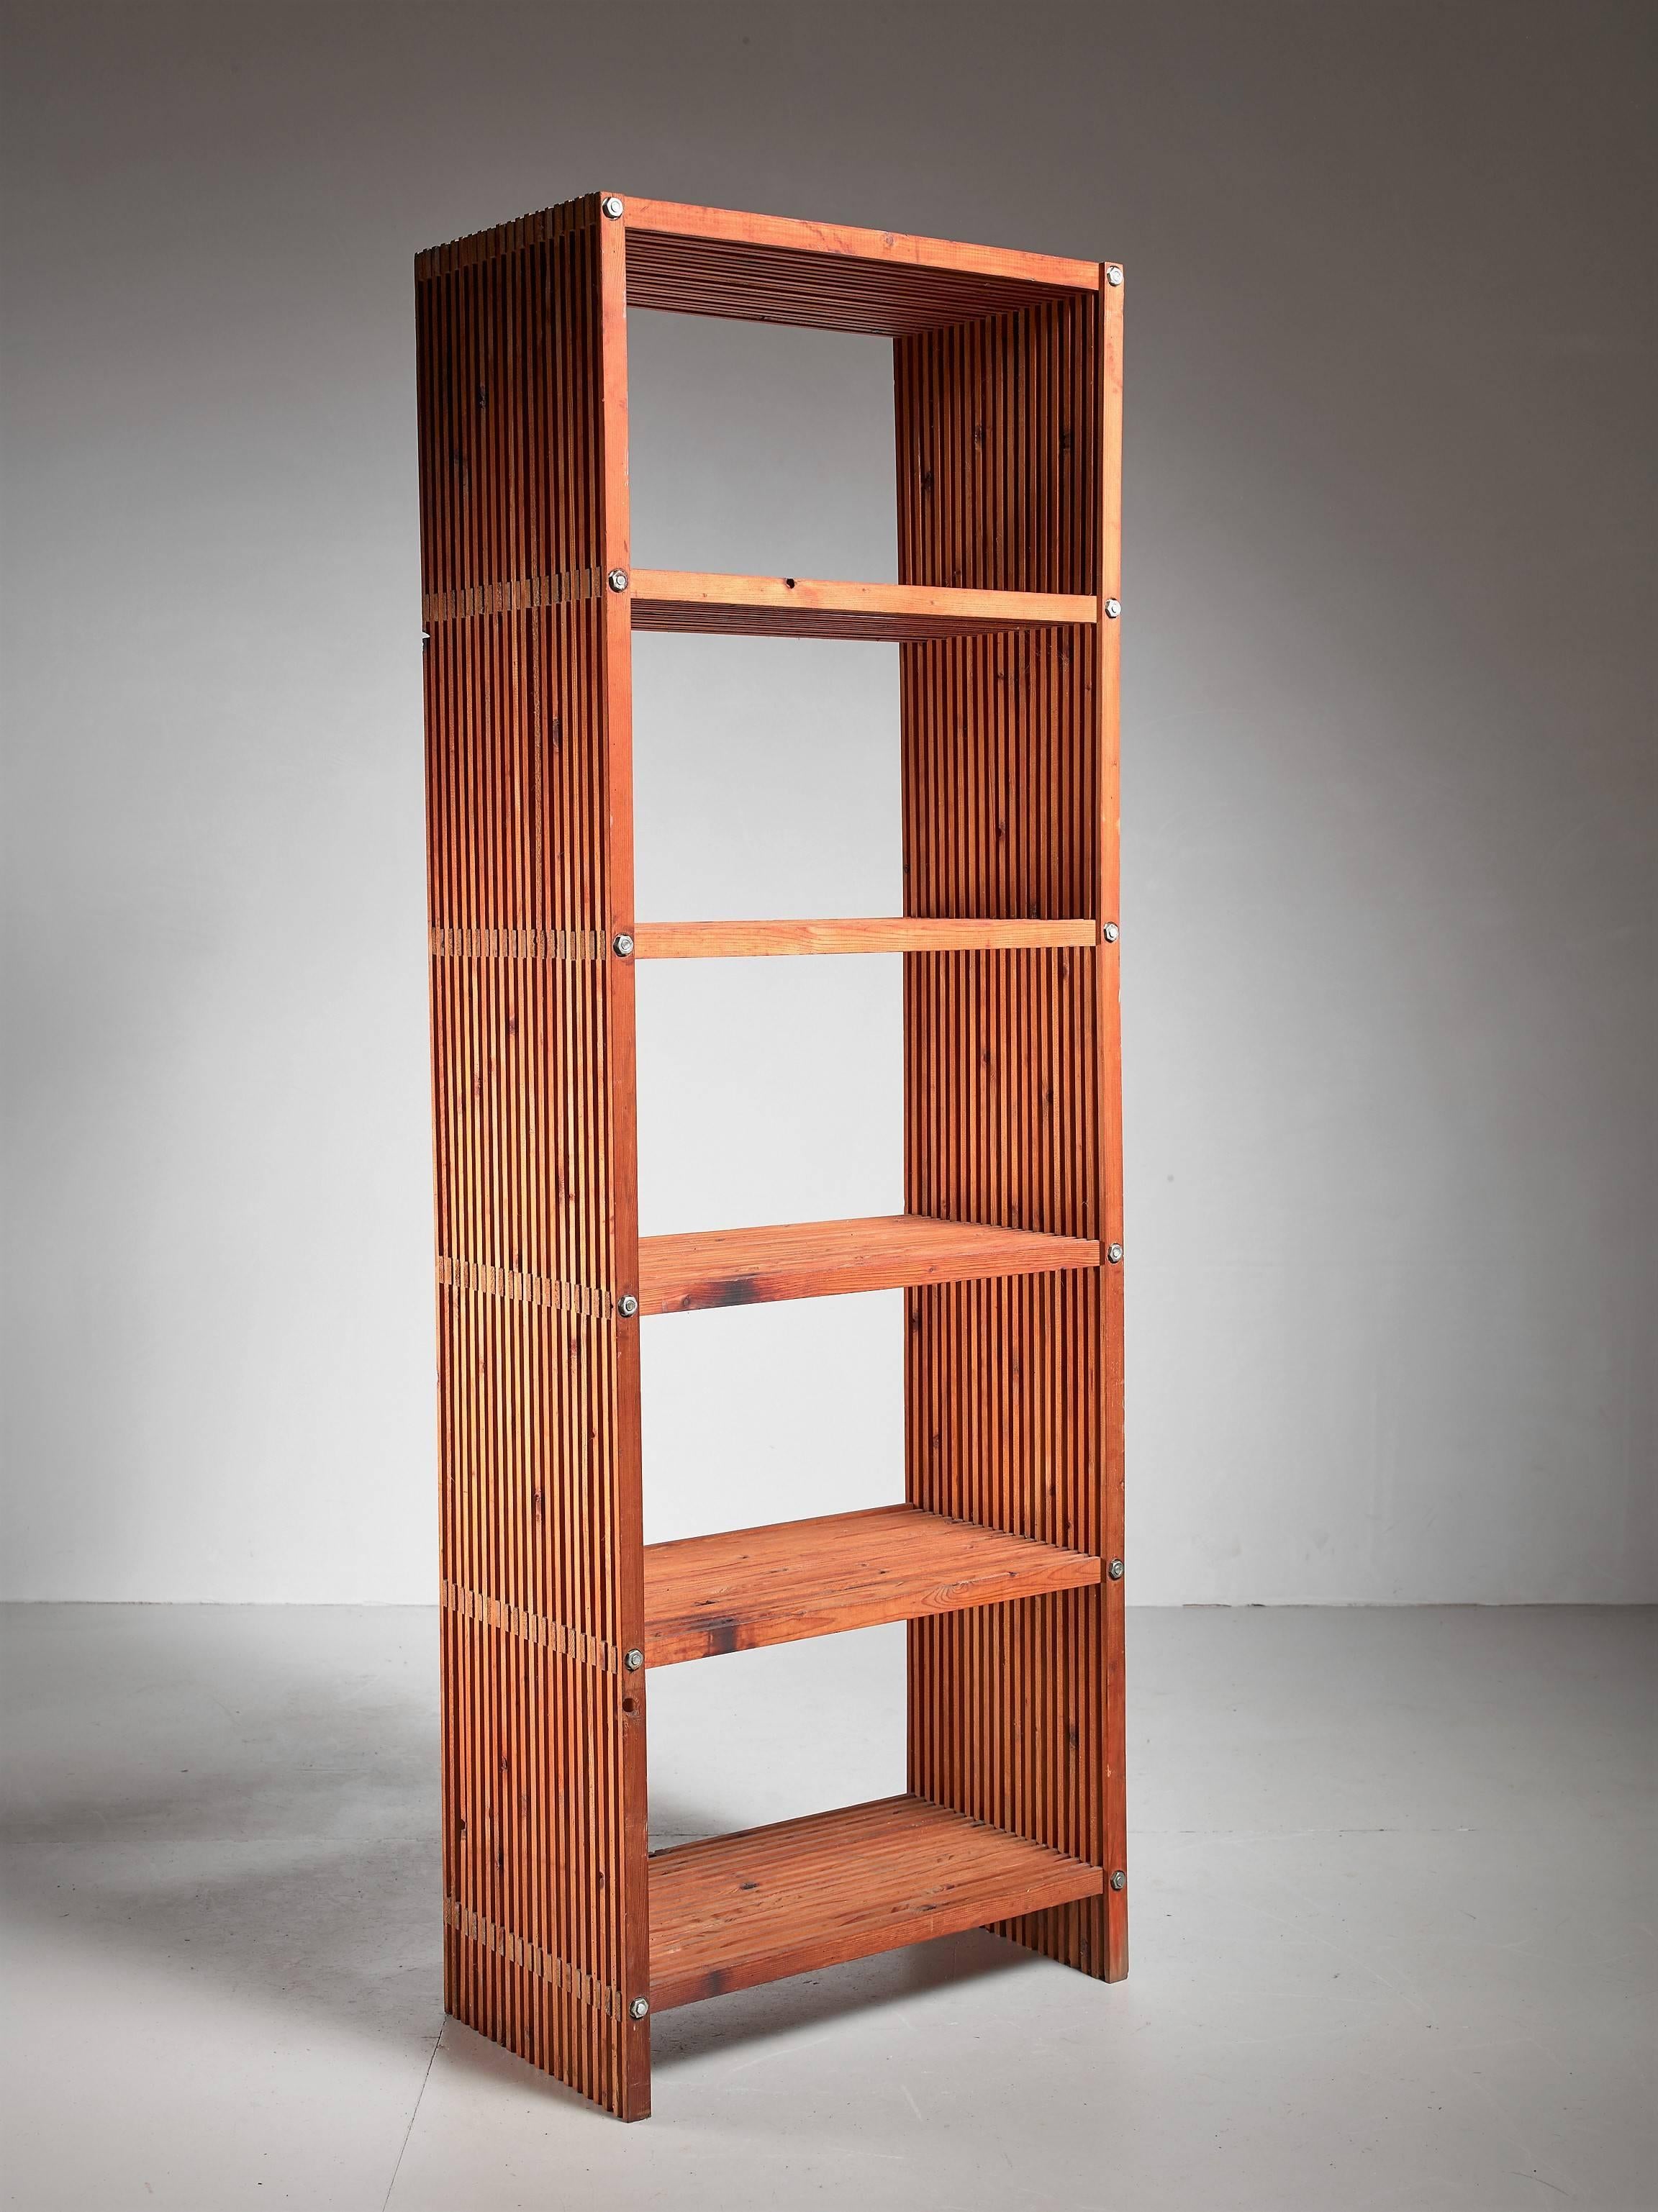 A high bookcase or storage unit in the Arts and Crafts style, made by an unidentified Dutch craftsman.
The unit is made of numerous slats in pine, held together with large screws. It has a wonderful semi-transparence and minimalistic lines.